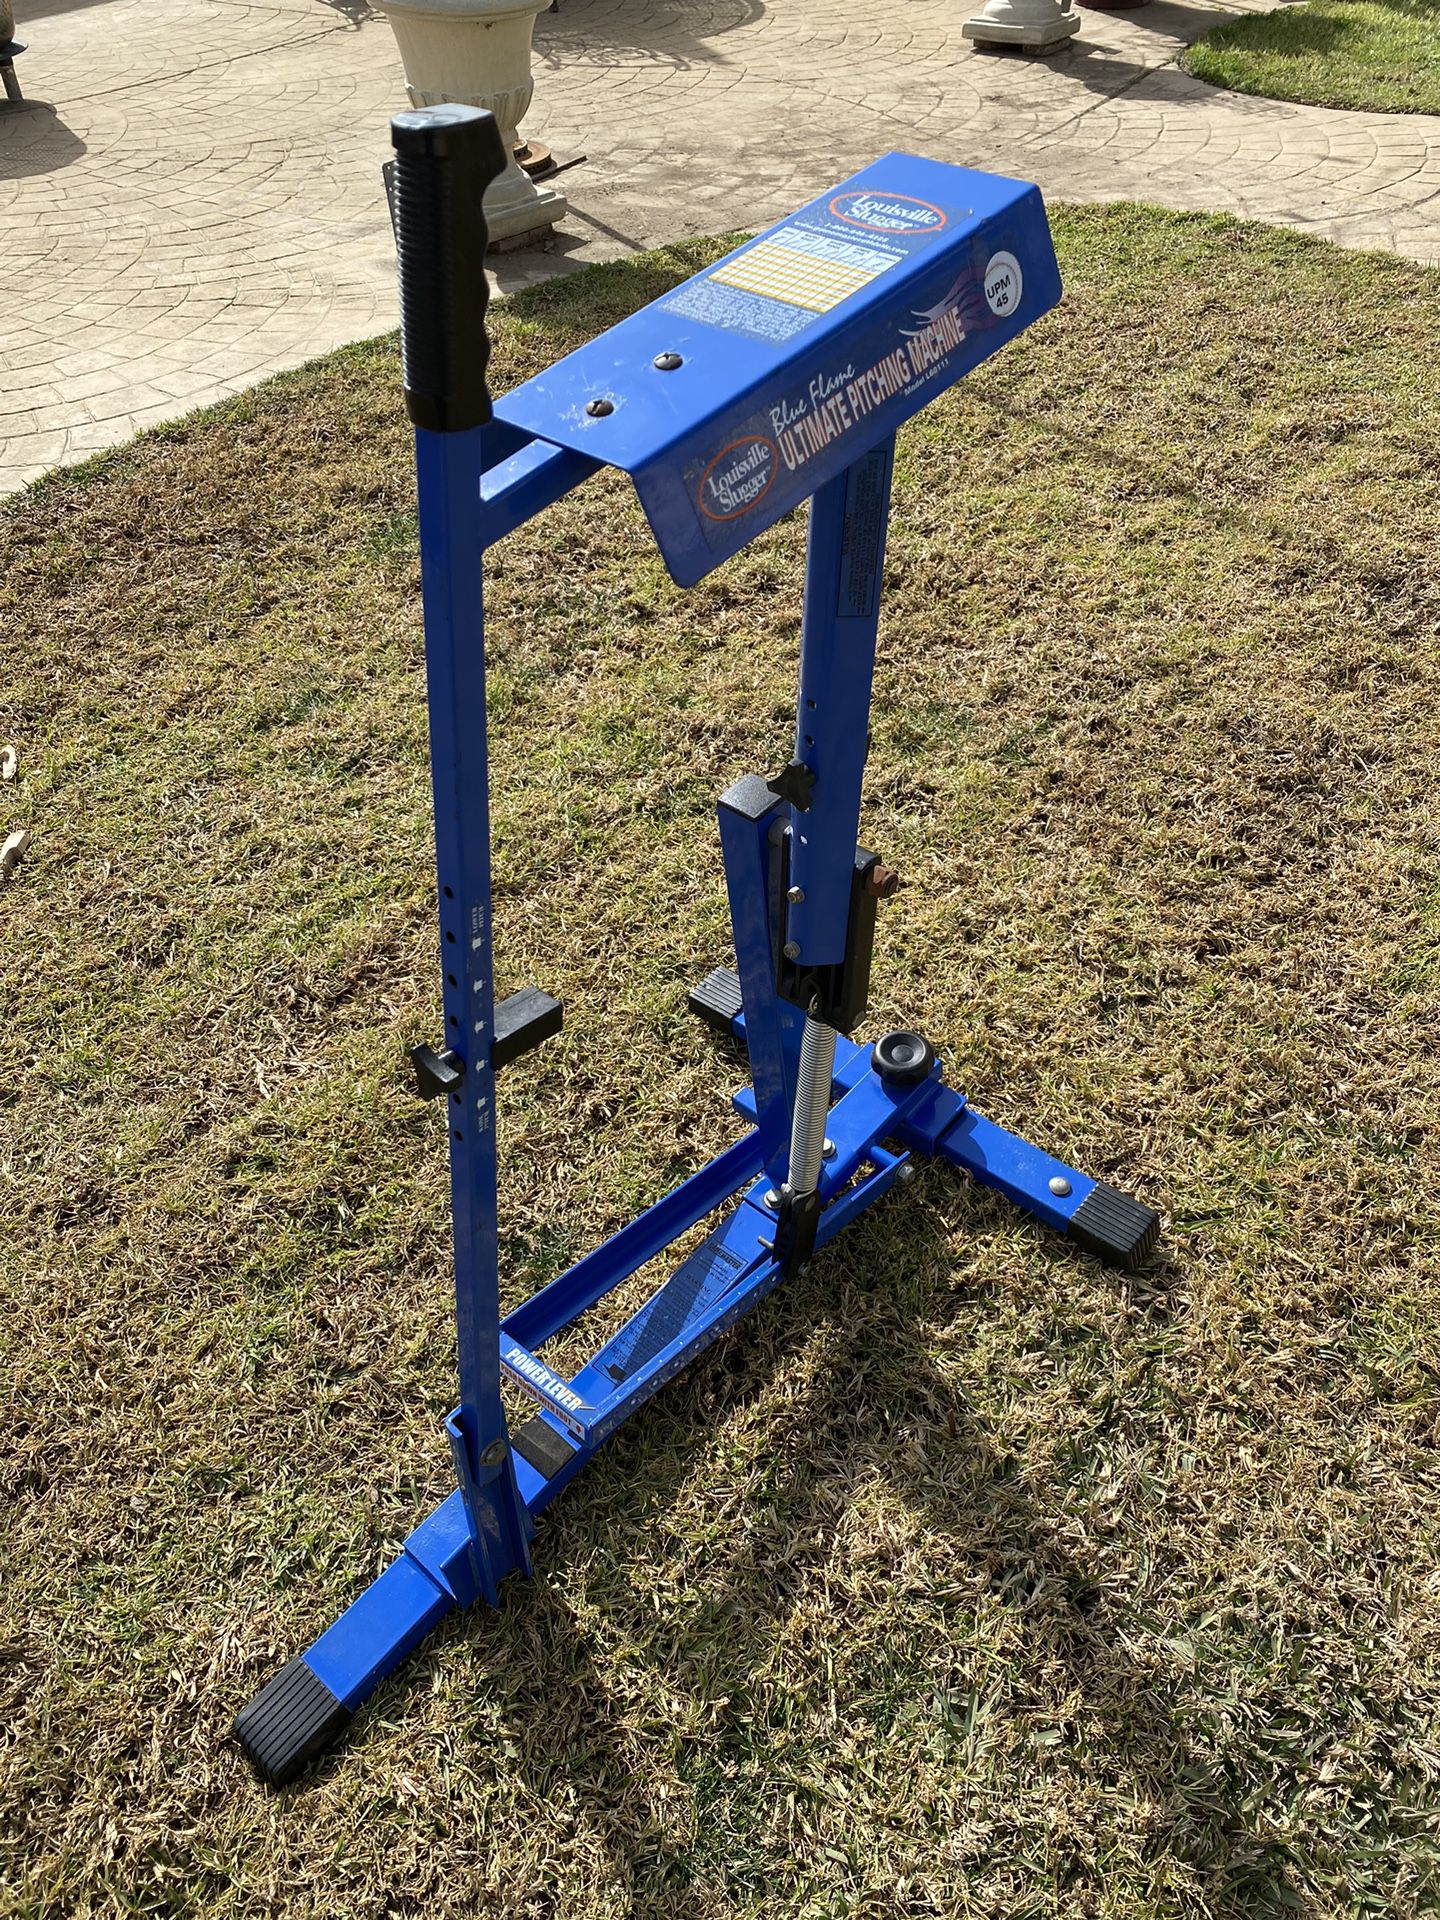 Louisville Slugger Blue Flame Pitching Machine for Sale in Alta Loma, CA -  OfferUp